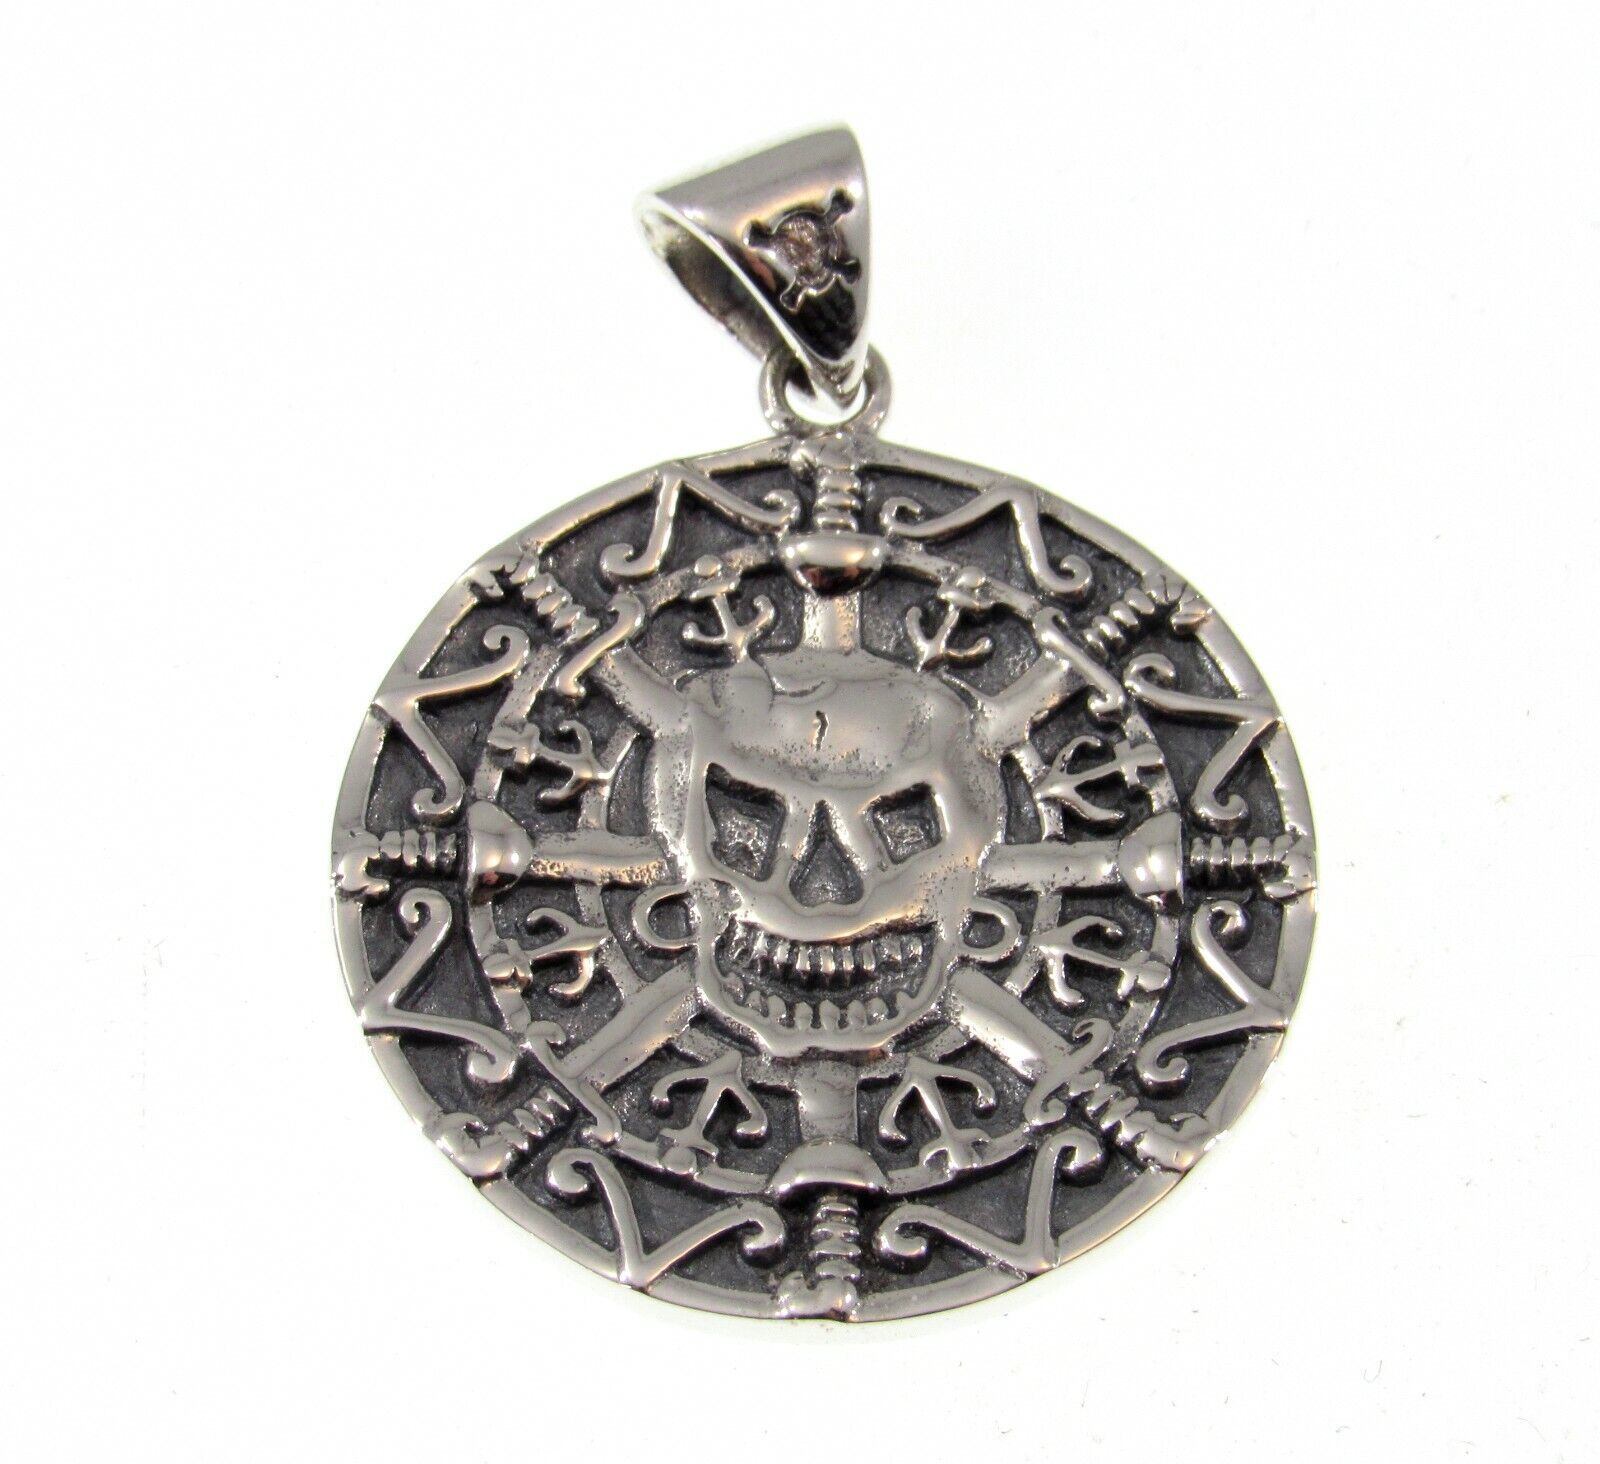 Primary image for Handcrafted Solid 925 Sterling Silver Aztec Mayan Pirate Skull Coin Pendant